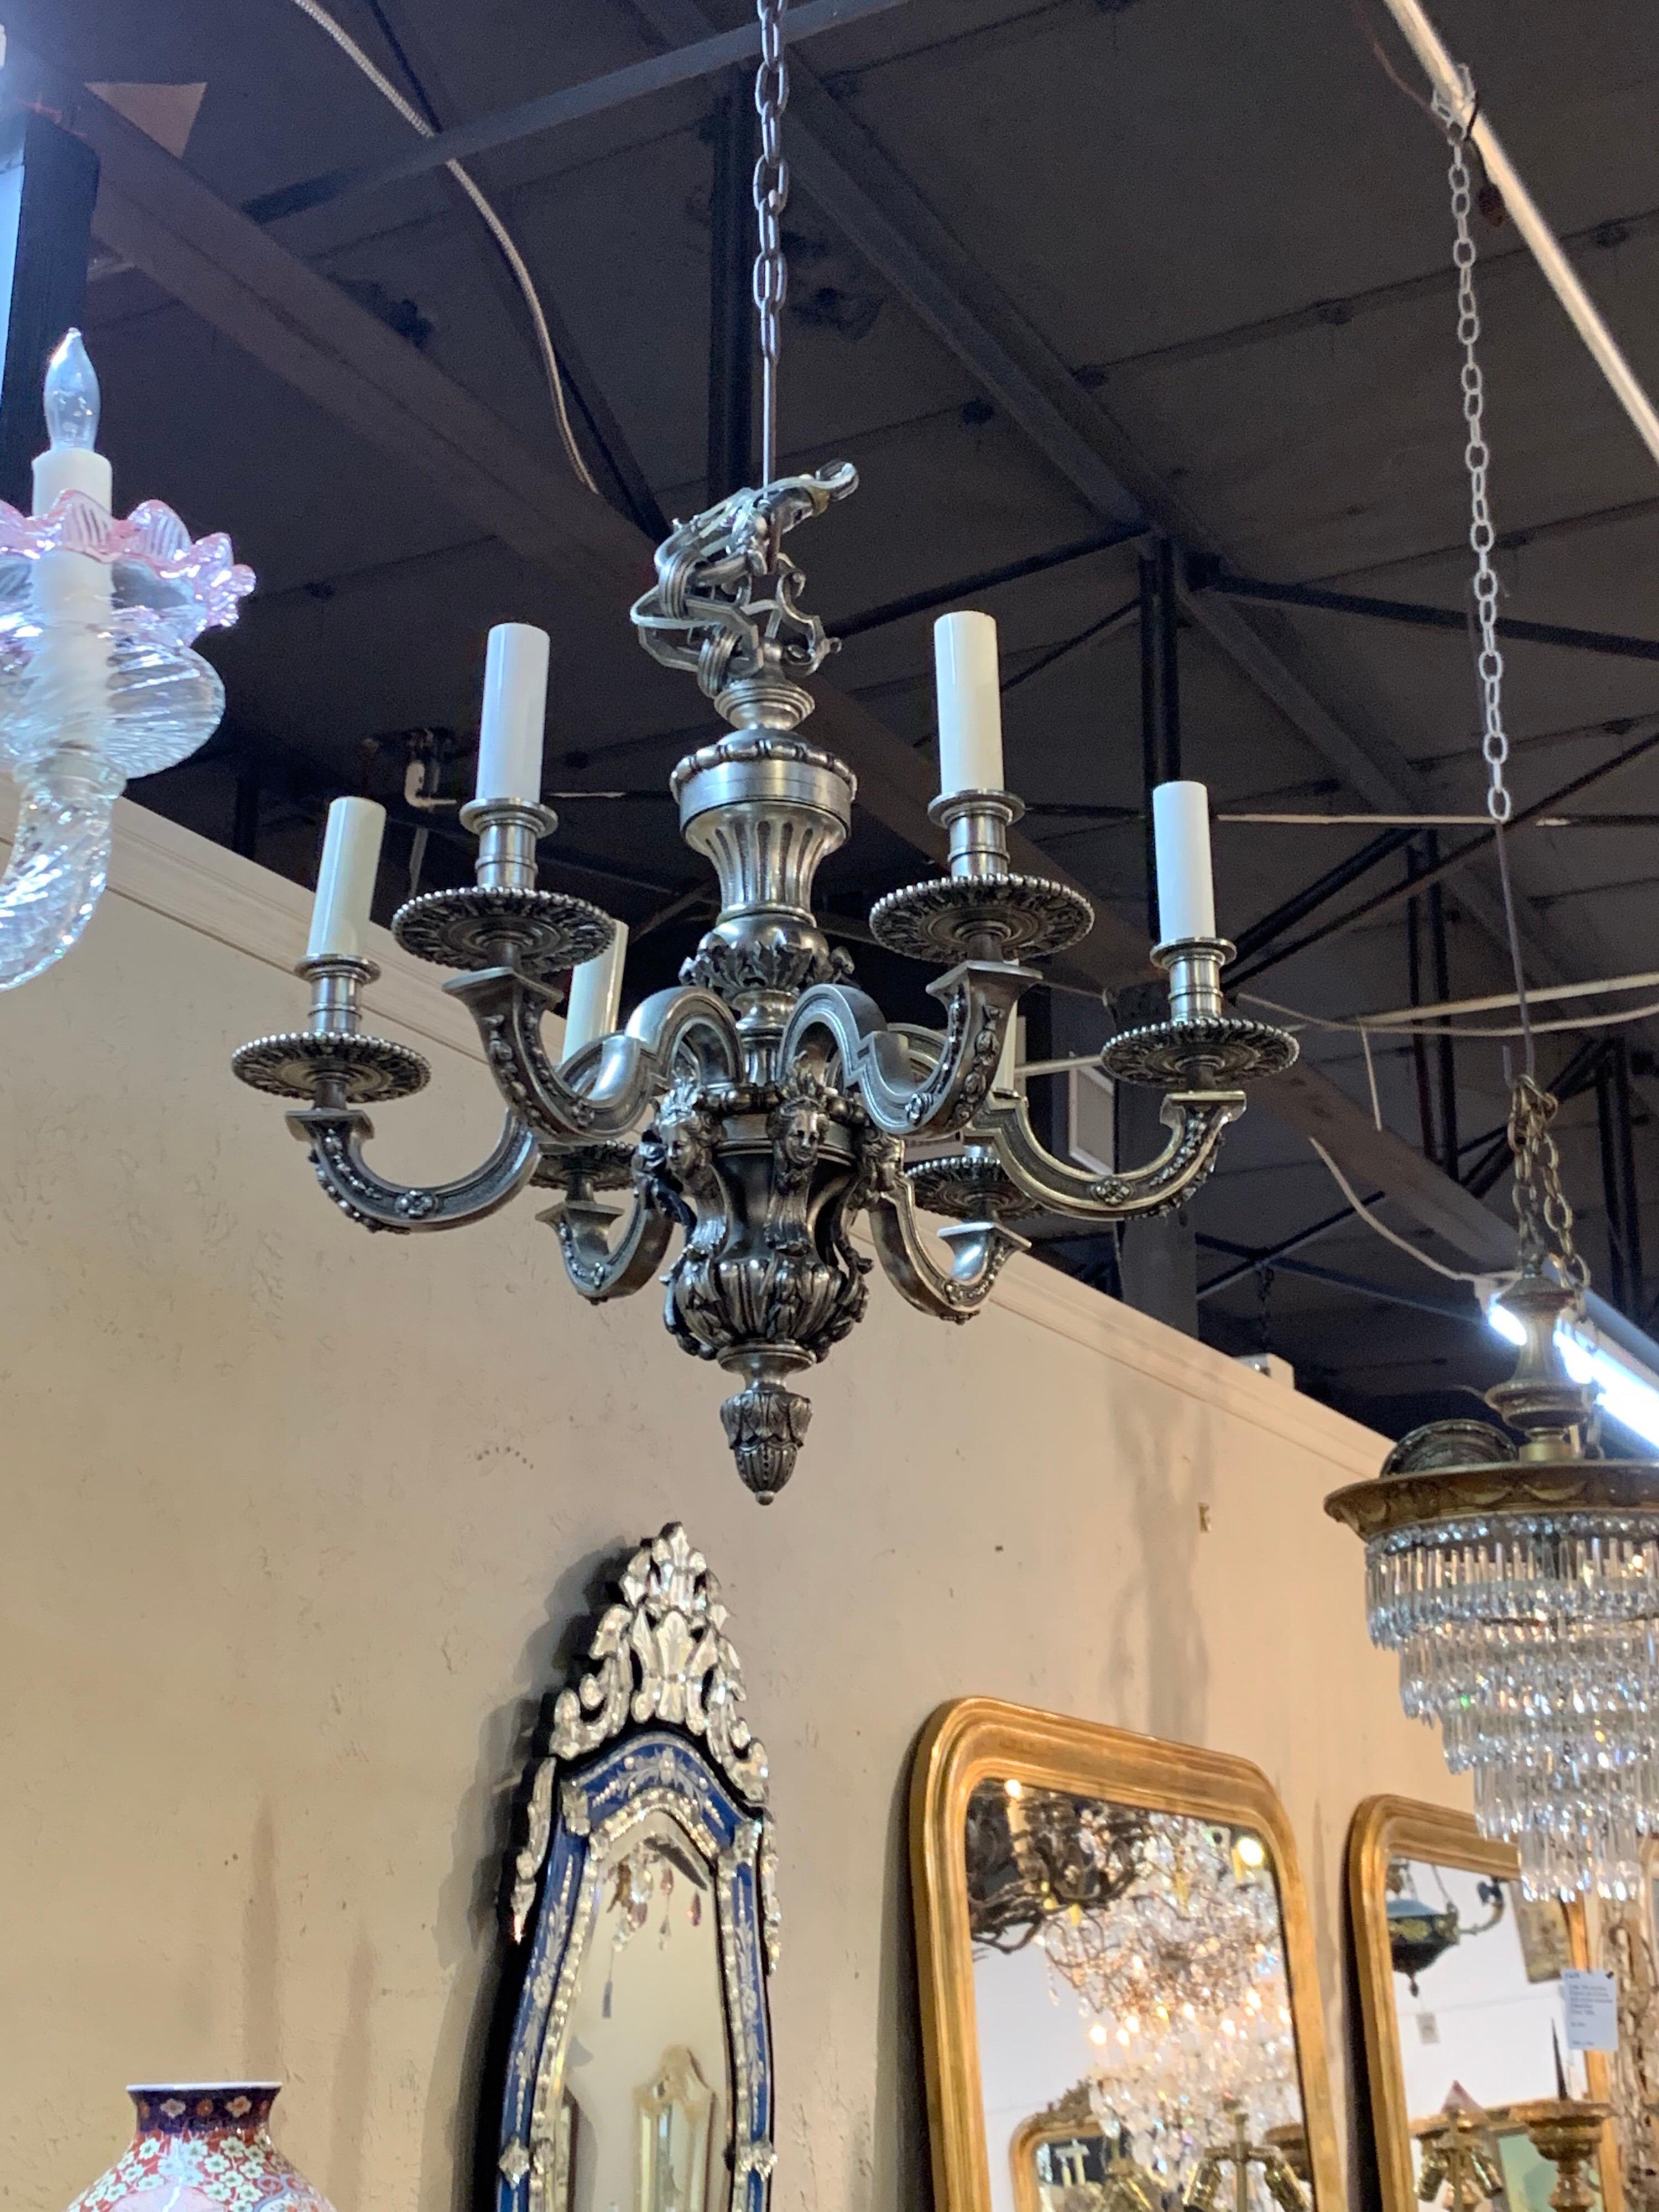 Beautiful French Renaissance style silvered bronze 6-light chandelier. Very fine details on this fixture, including faces on the lower part of the base. So interesting!